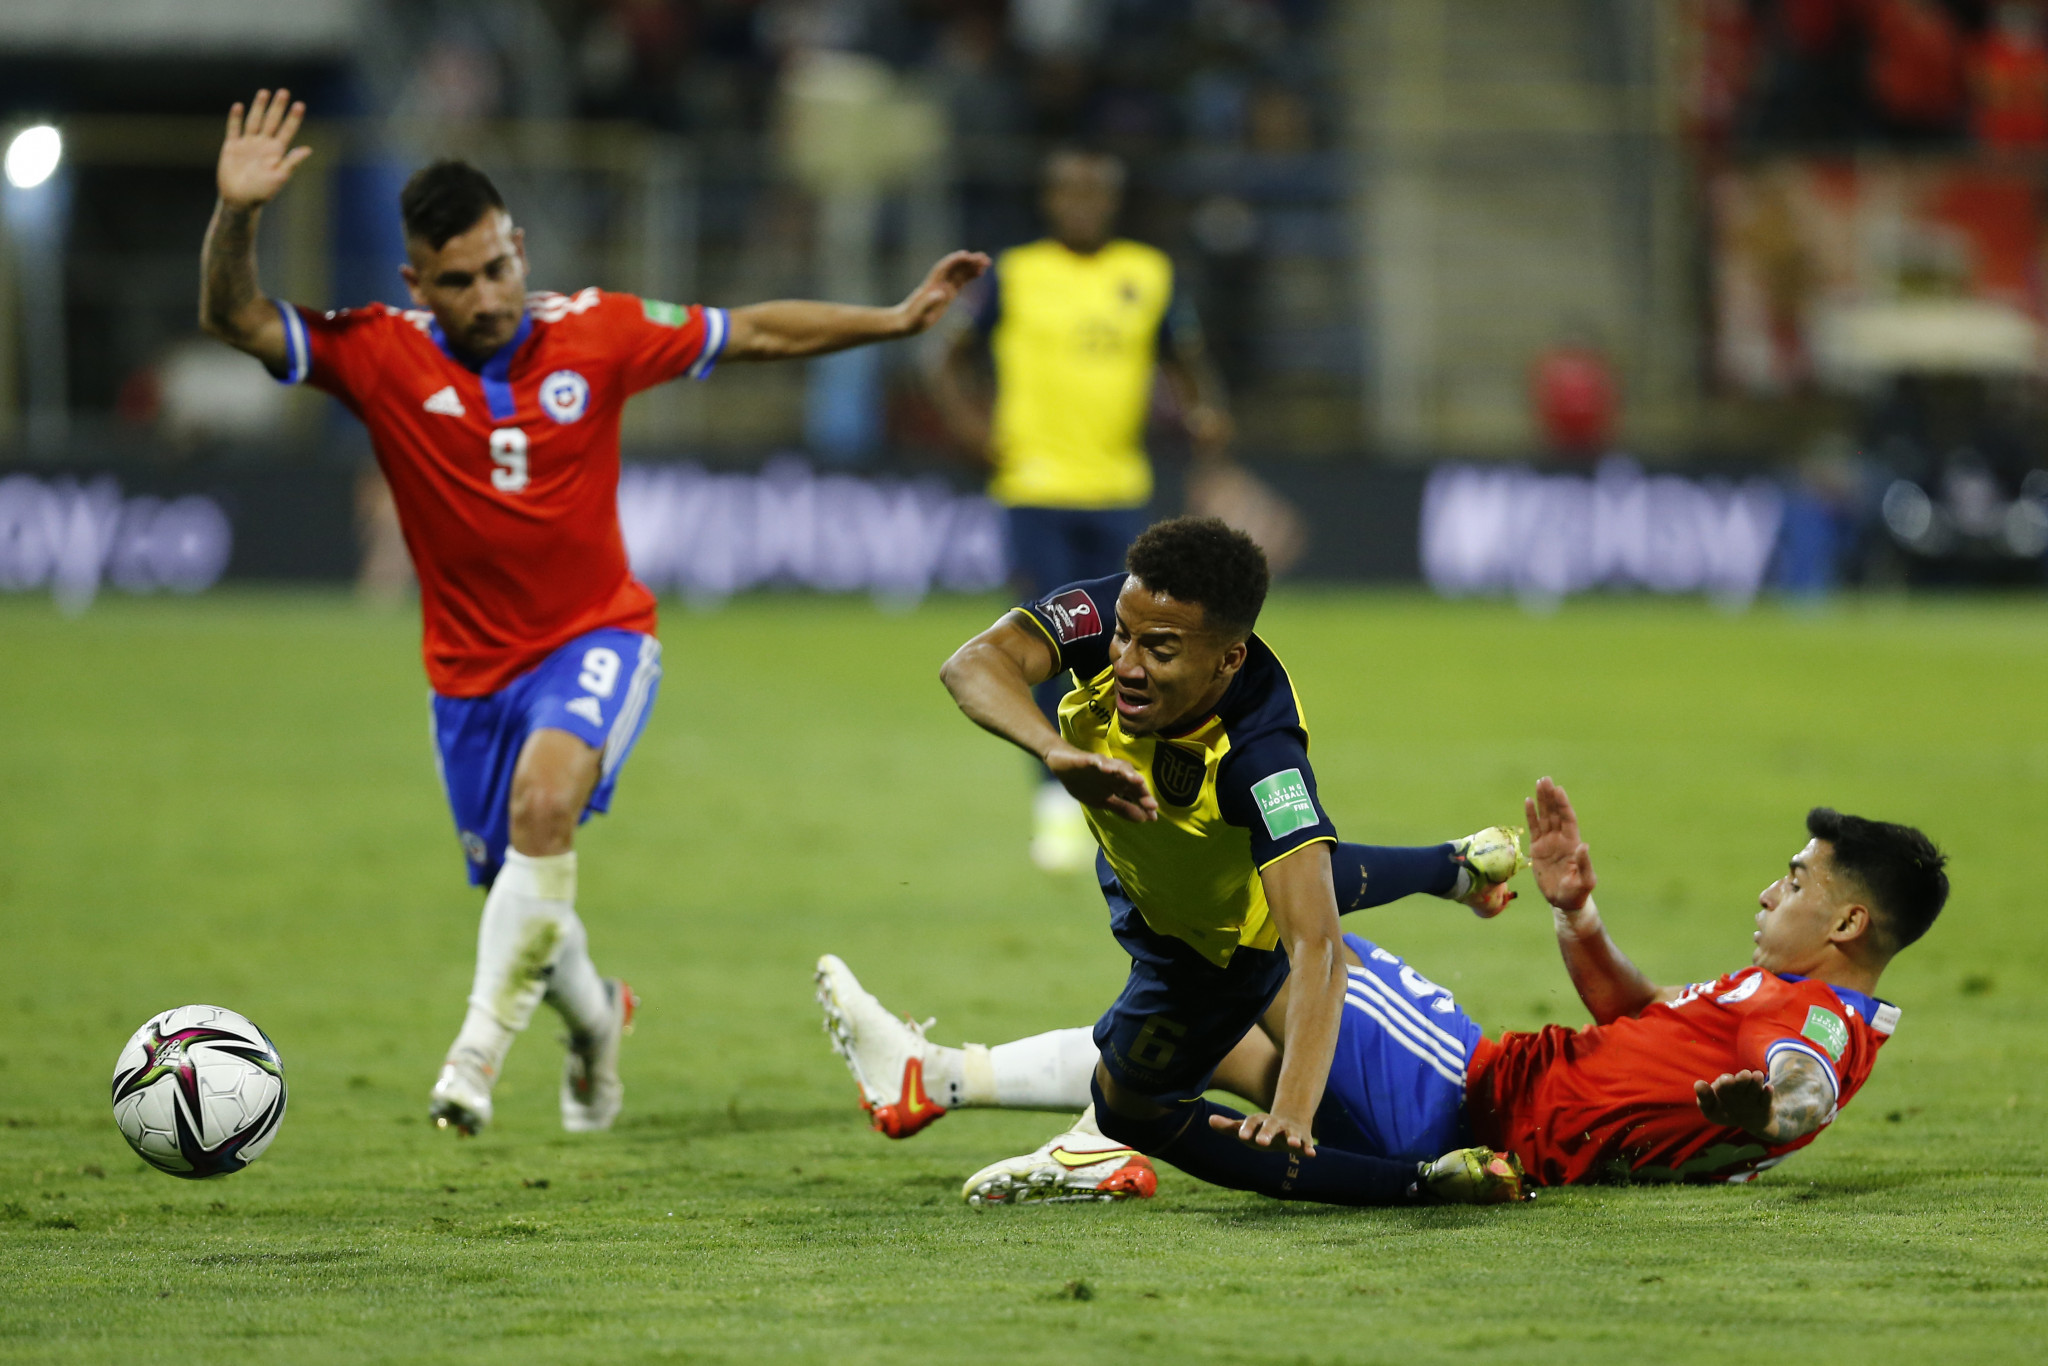 The Football Federation of Chile alleges Byron Castillo, in yellow, was born in Colombia, not Ecuador ©Getty Images